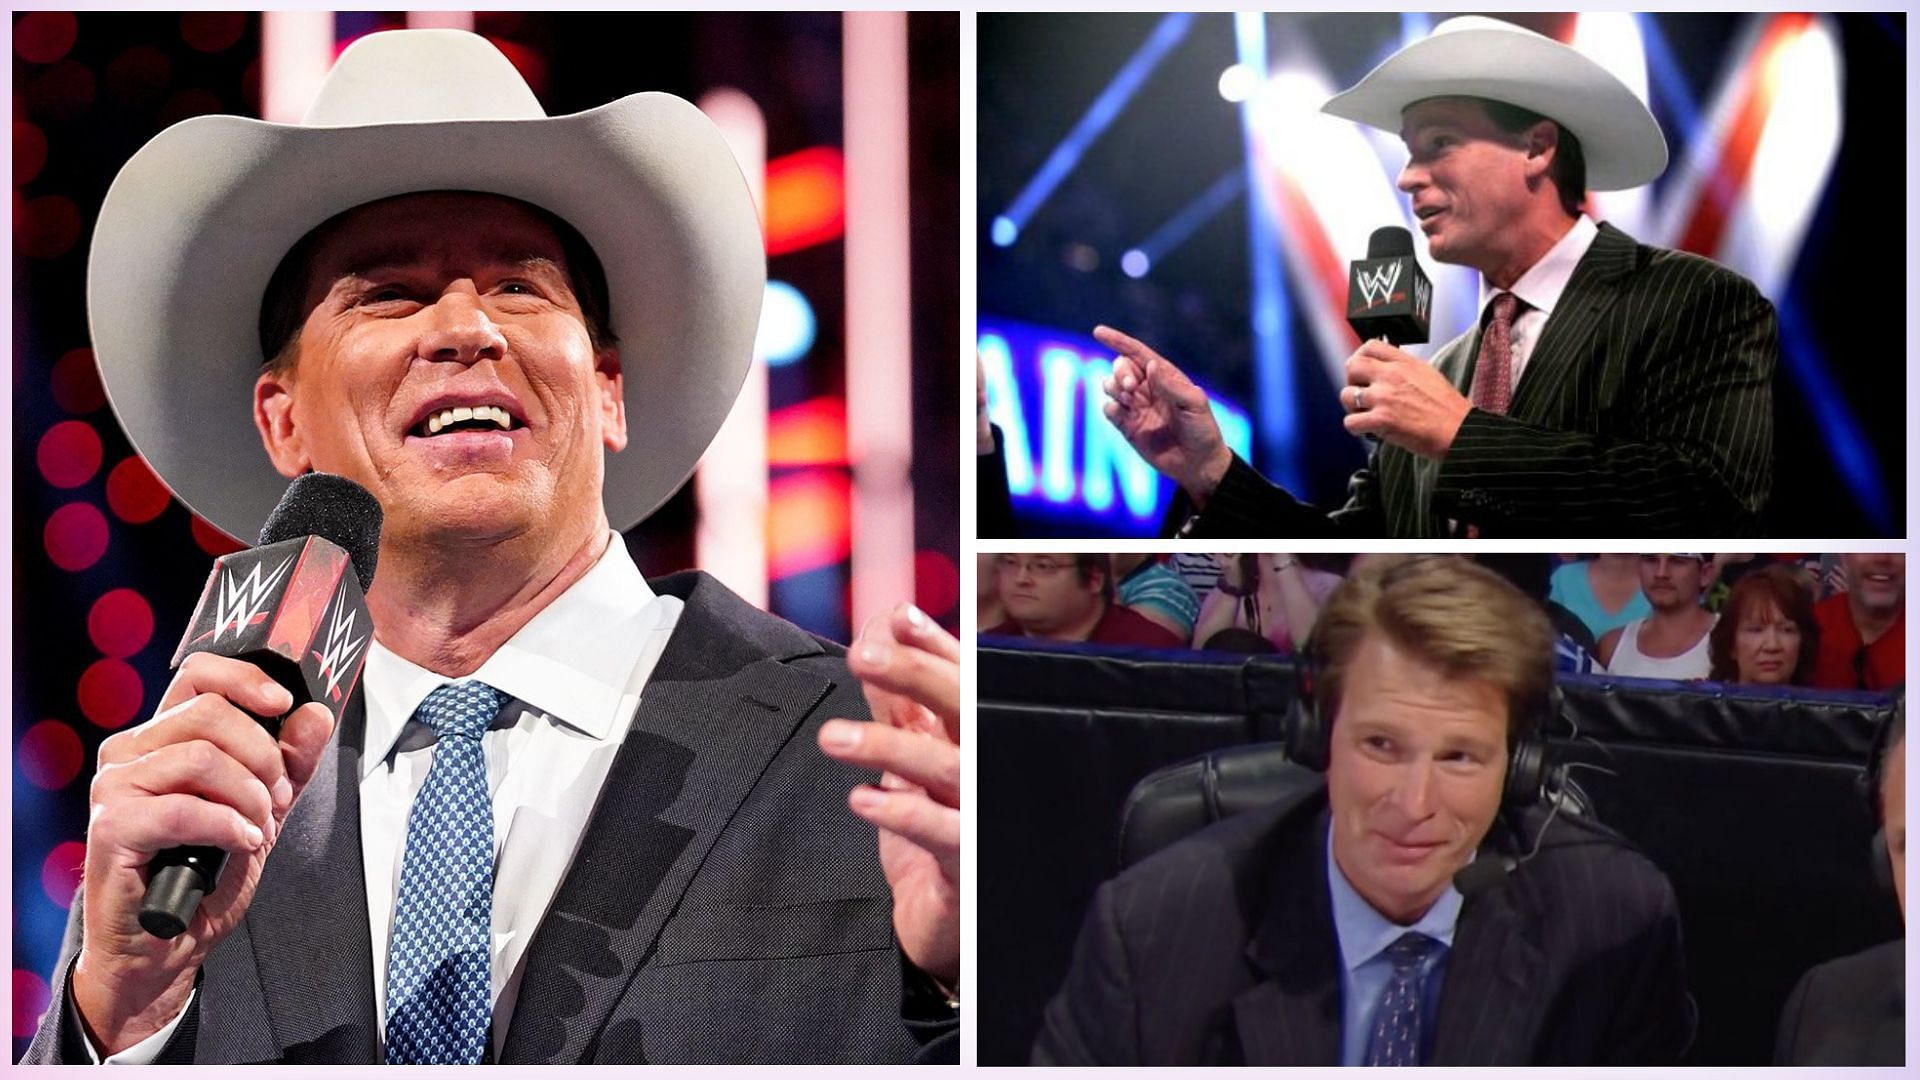 JBL is a grand slam champion and a WWE Hall of Famer.